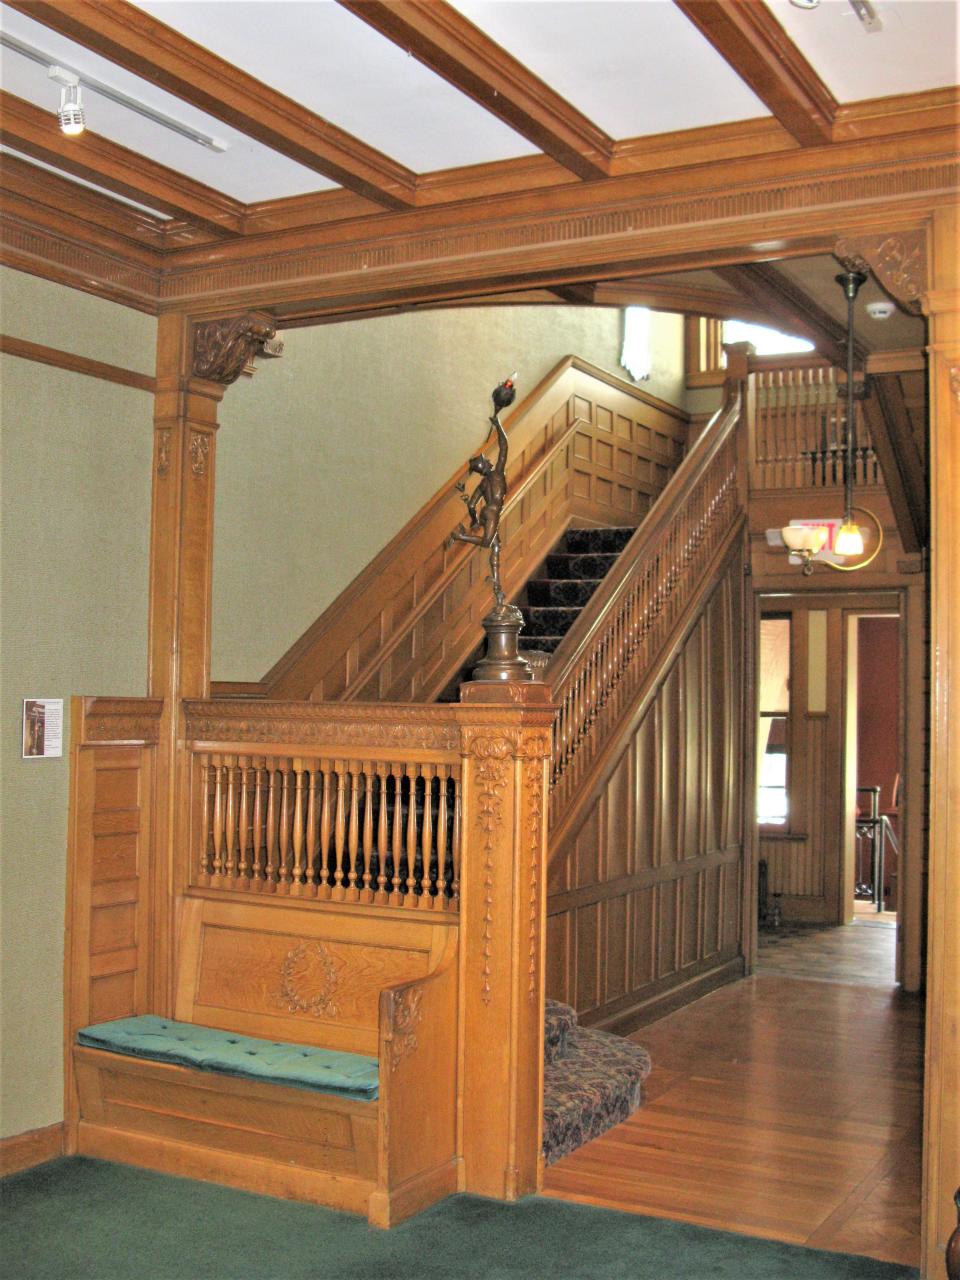 Inside the Vilas-Rahr Mansion in Manitowoc. All woodwork trim was golden oak, quarter-sawn, and the floor, of the same material, was bordered in a simple parquet design.